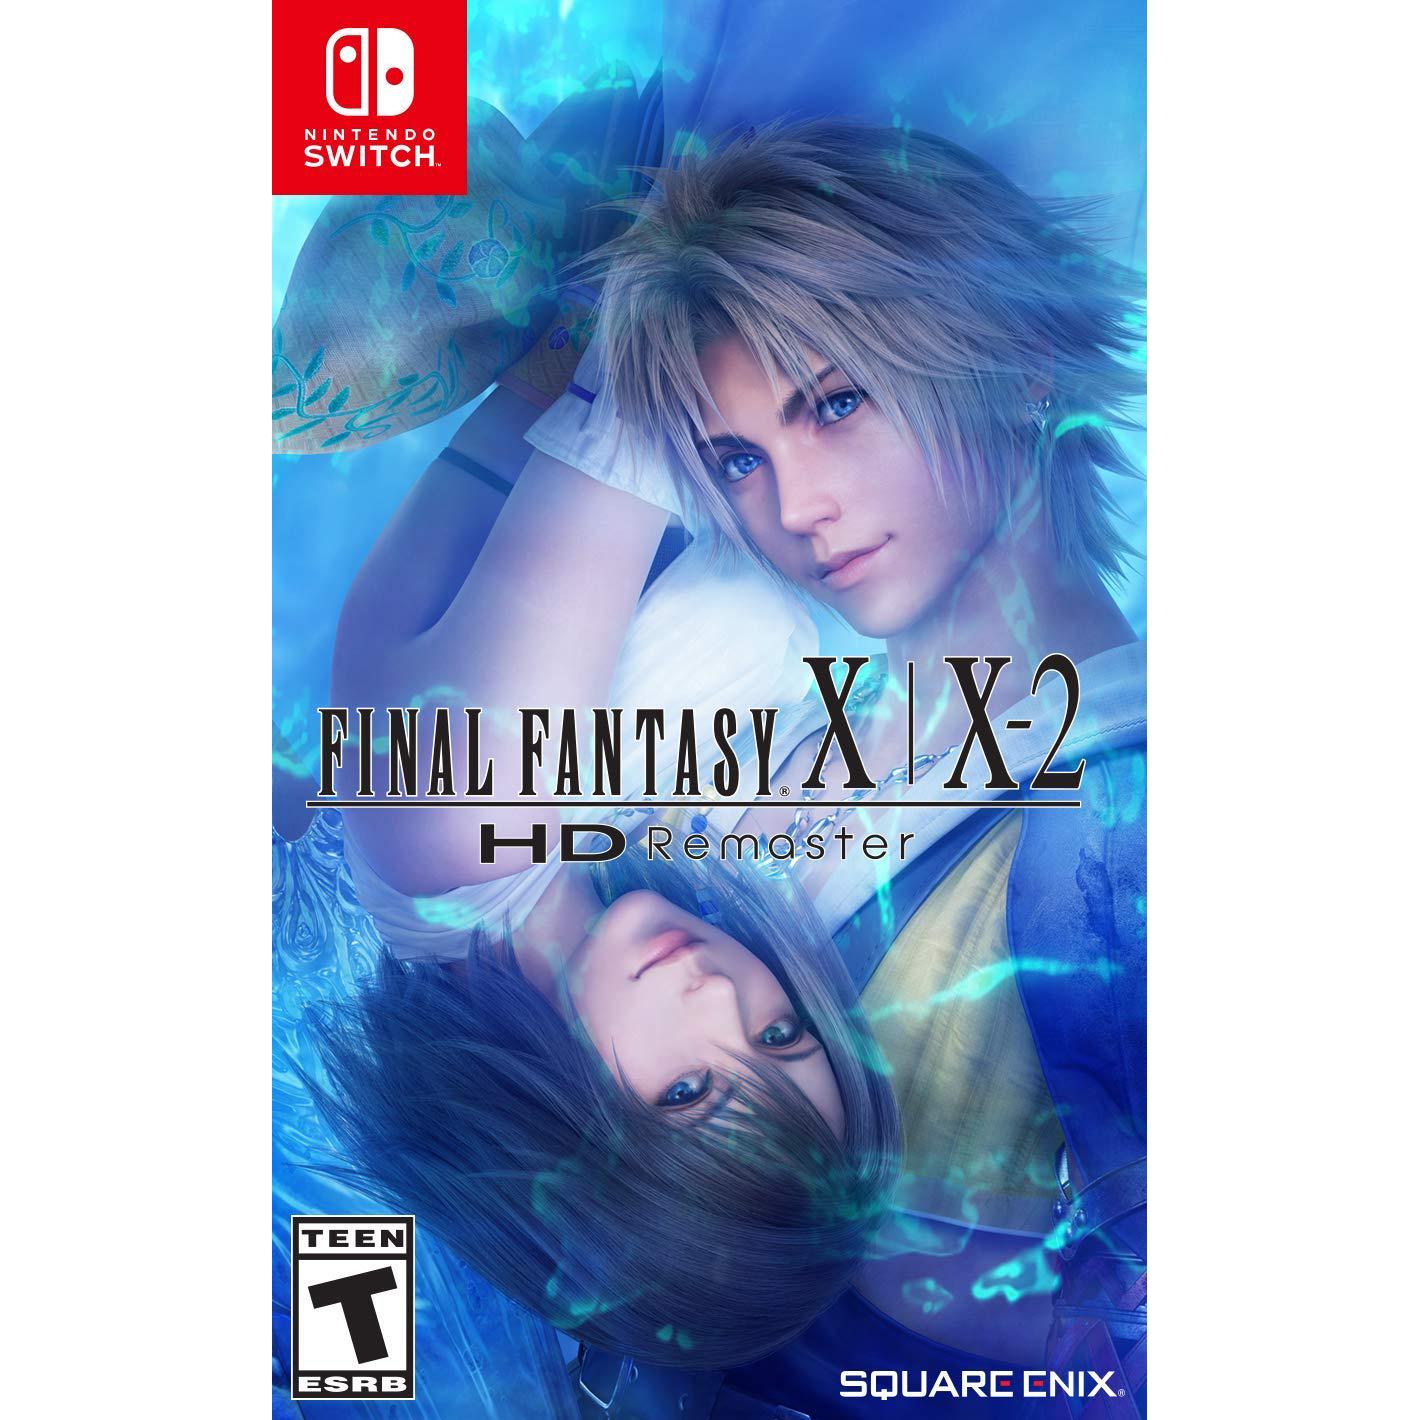 Final Fantasy X X-2 Remaster Nintendo Switch for $19.99